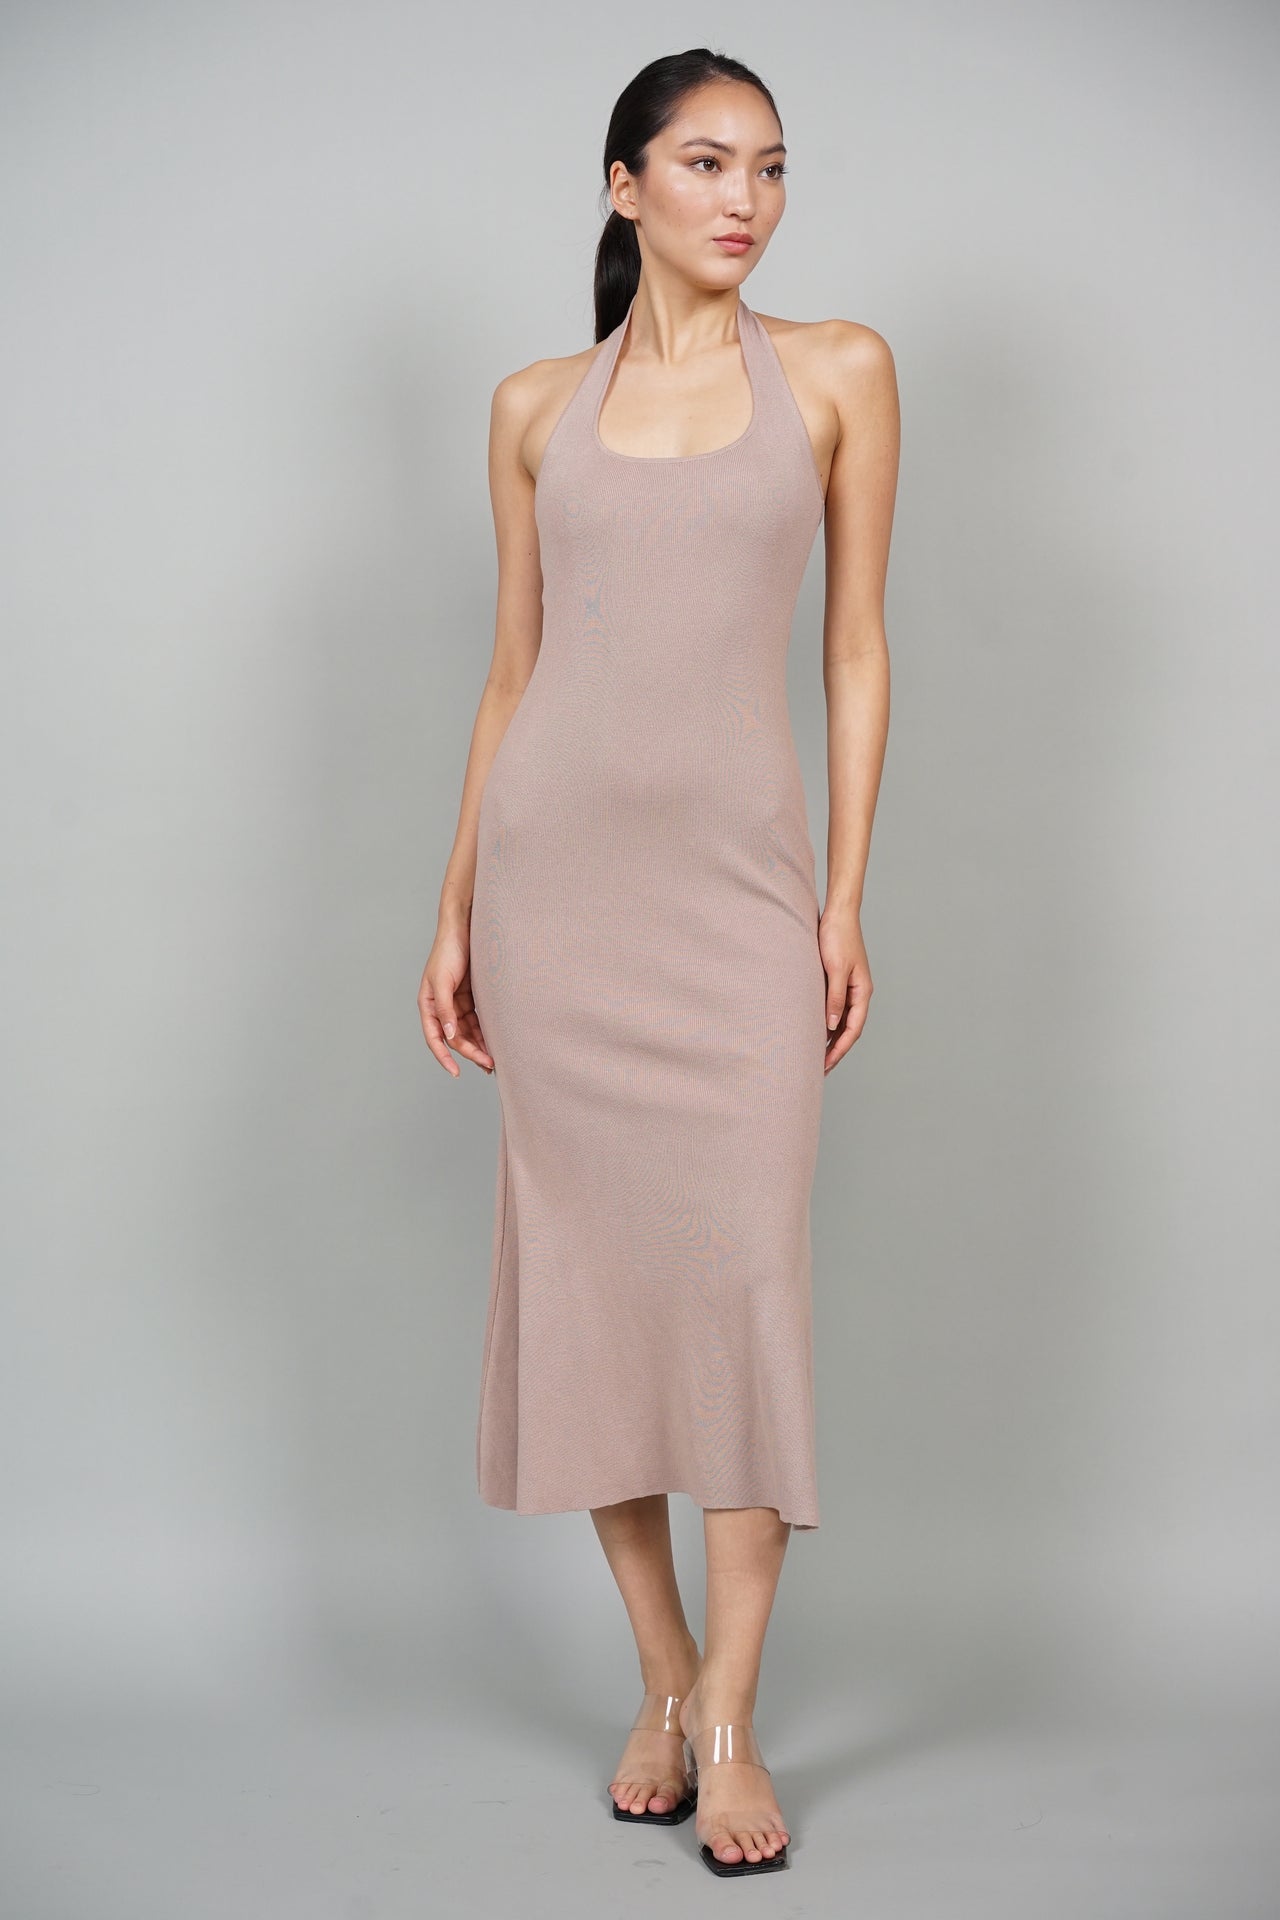 EVERYDAY / Sienna Dress in Taupe